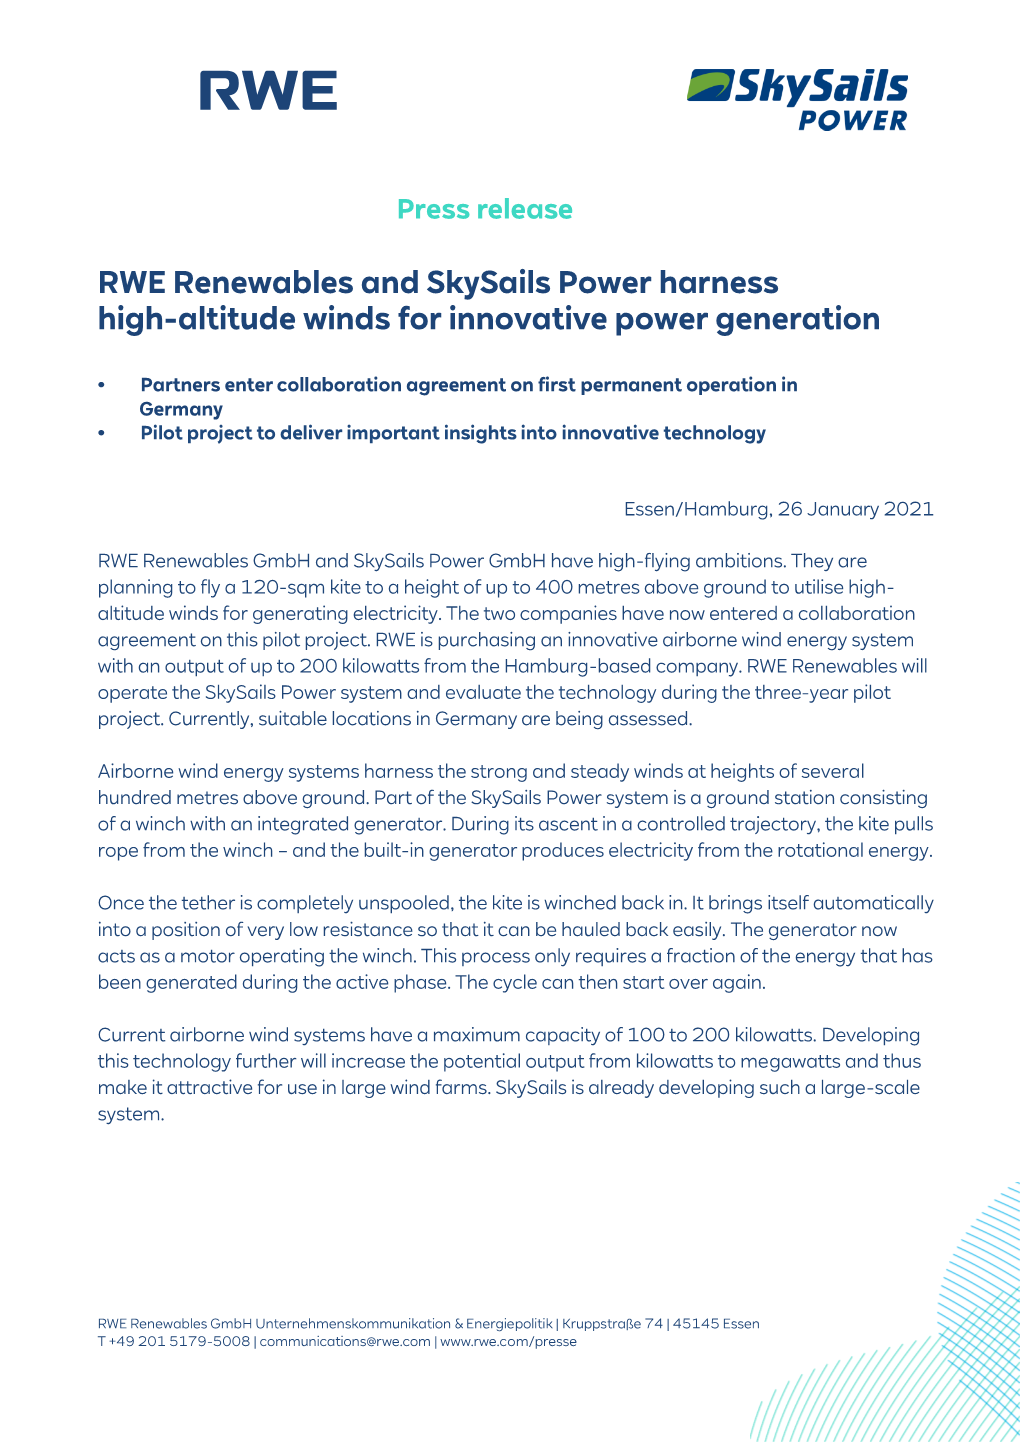 RWE Renewables and Skysails Power Harness High-Altitude Winds for Innovative Power Generation